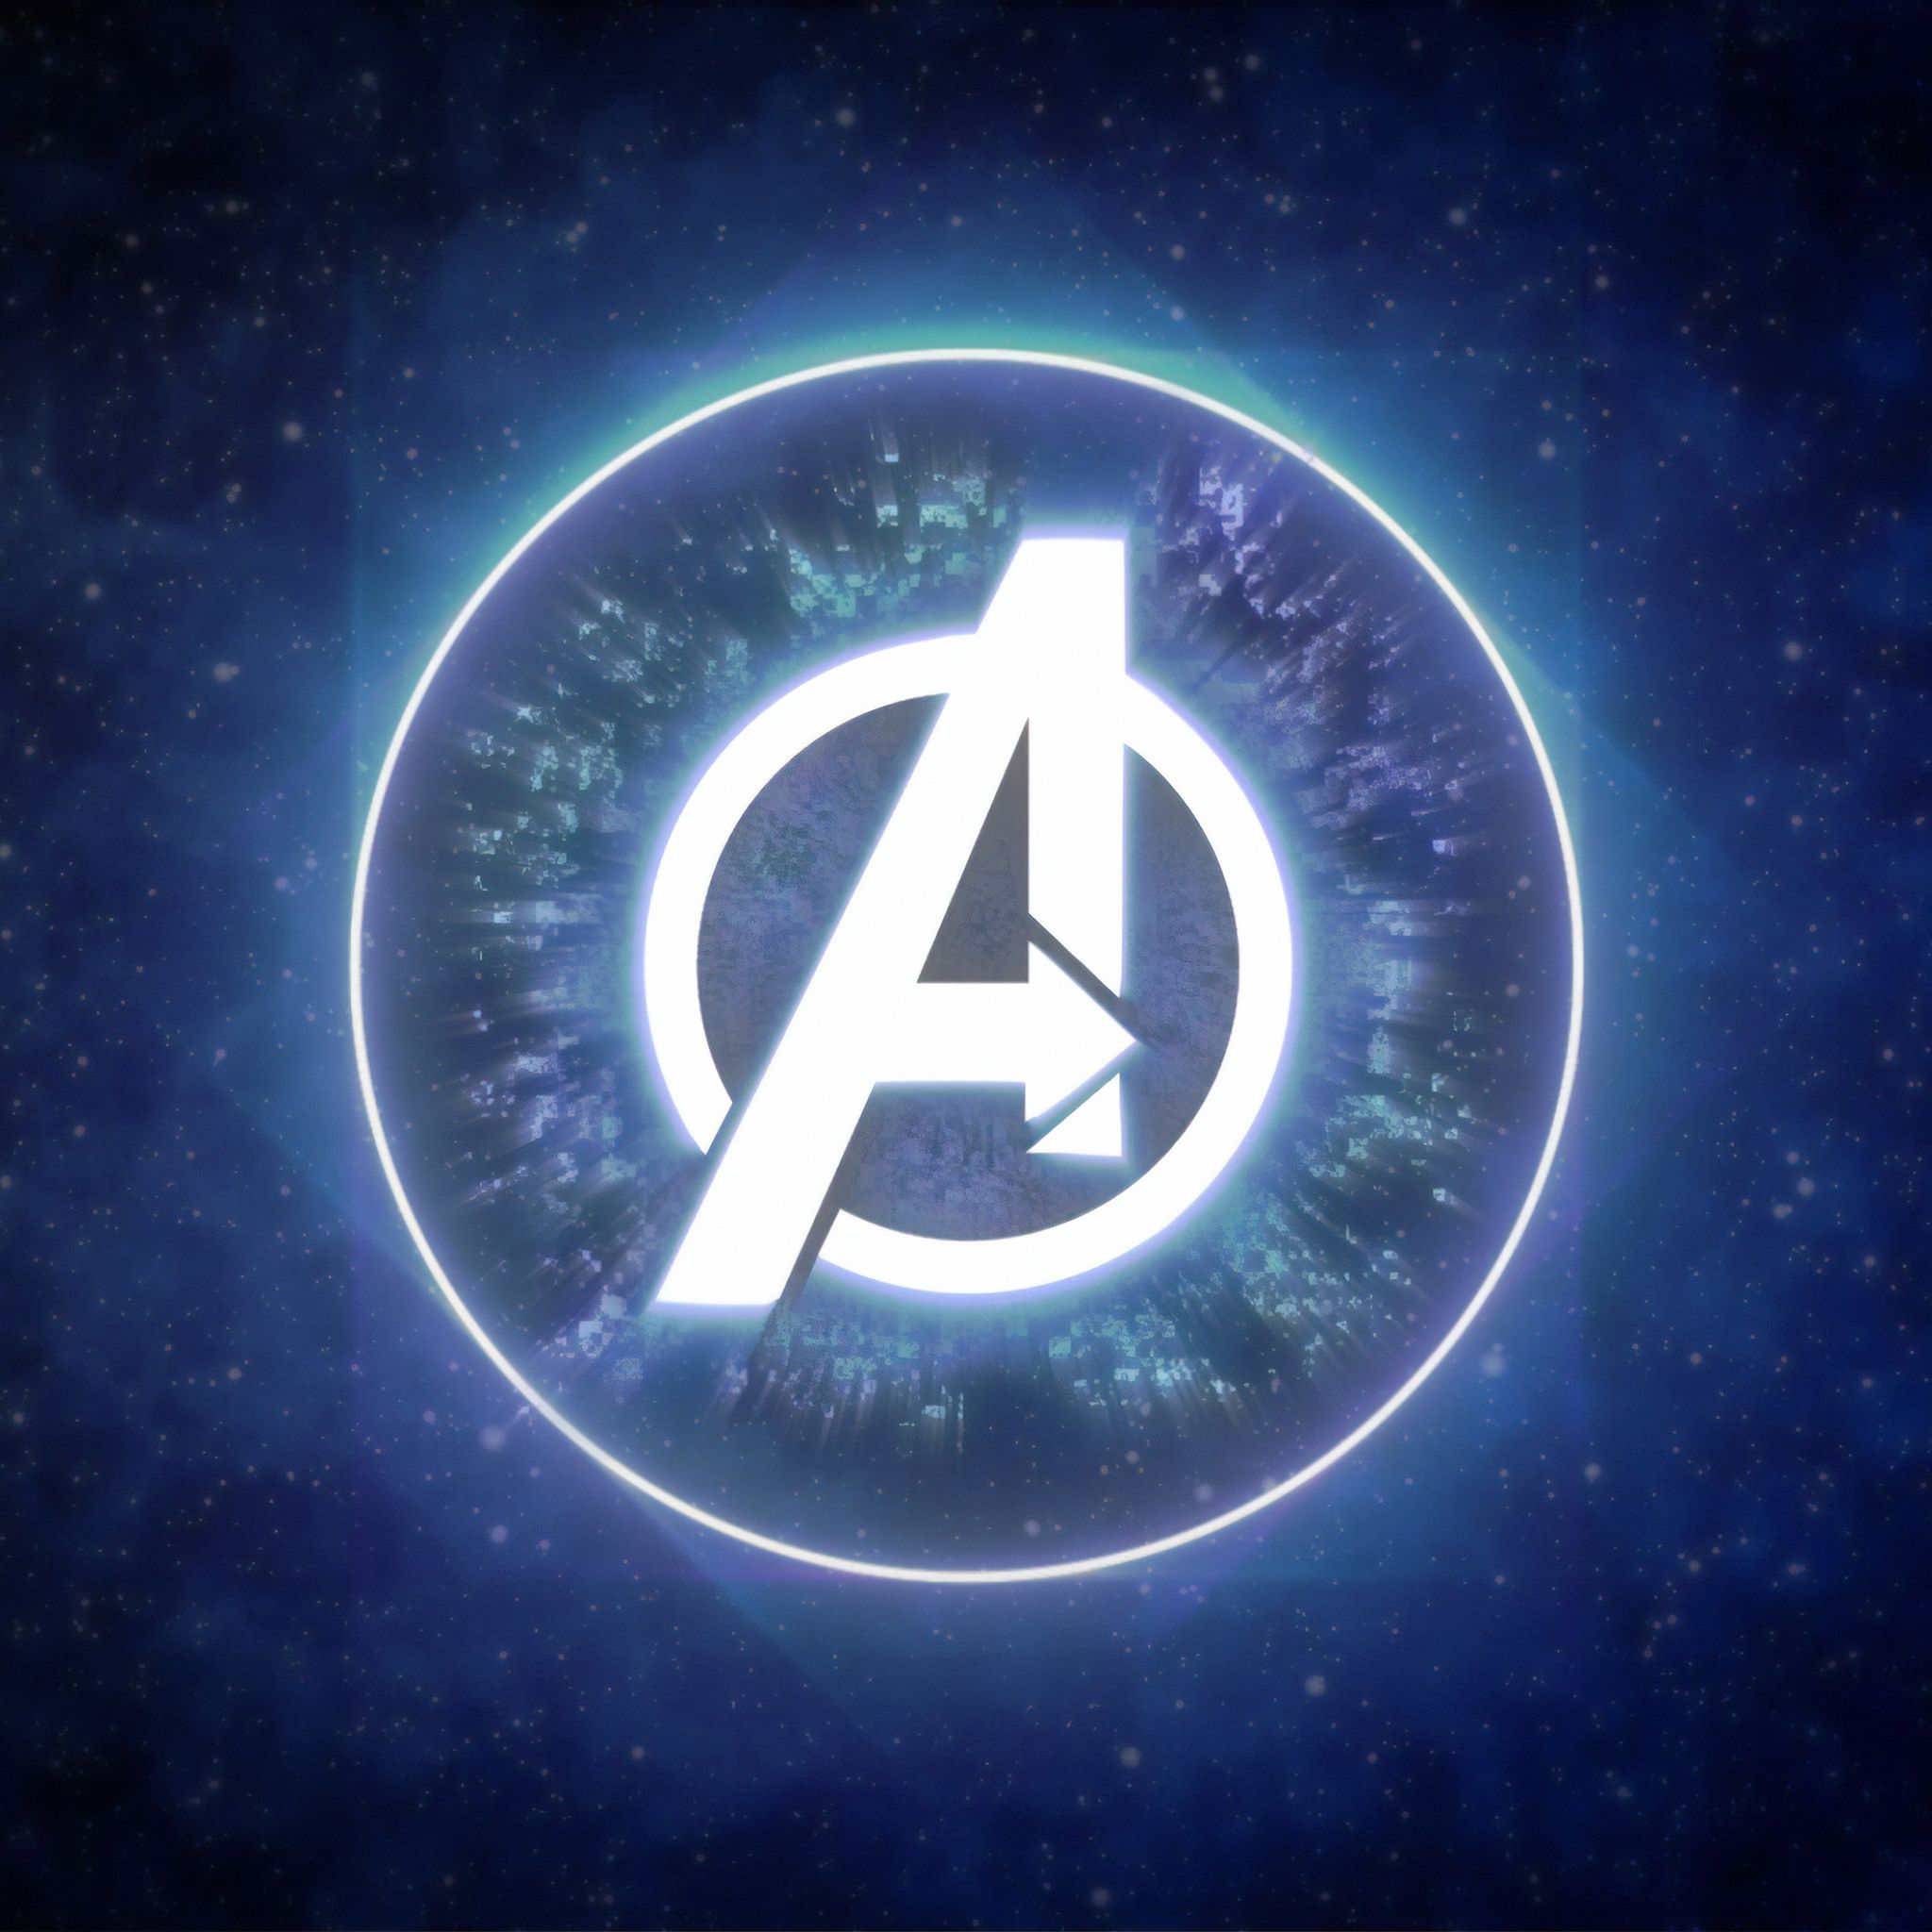 2048x2048 Avengers Logo 4k Ipad Air HD 4k Wallpapers, Image, Backgrounds, Photos and Pictures